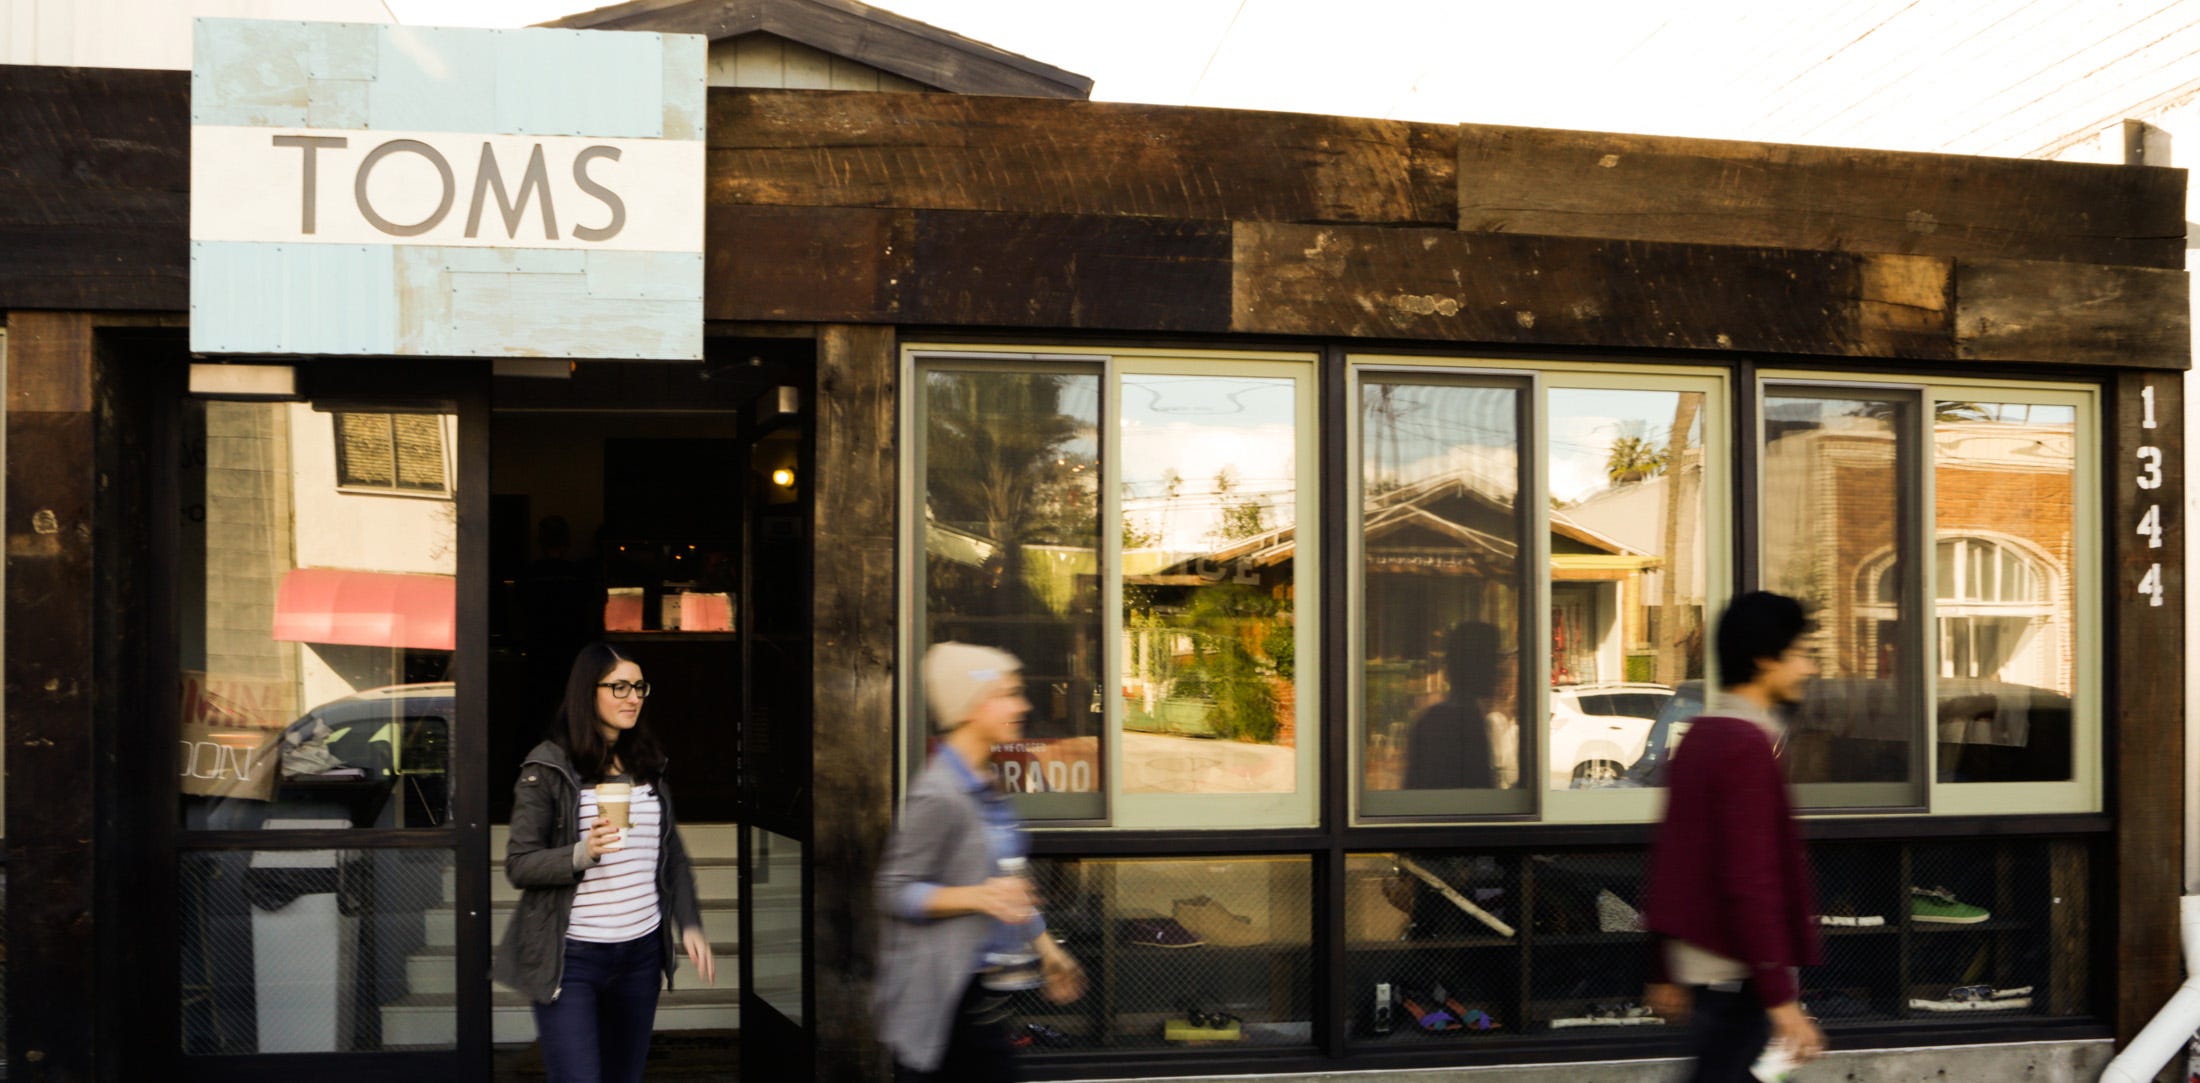 A boho shoe-in: Commerce meets community in Toms' casual, rustic new retail  space